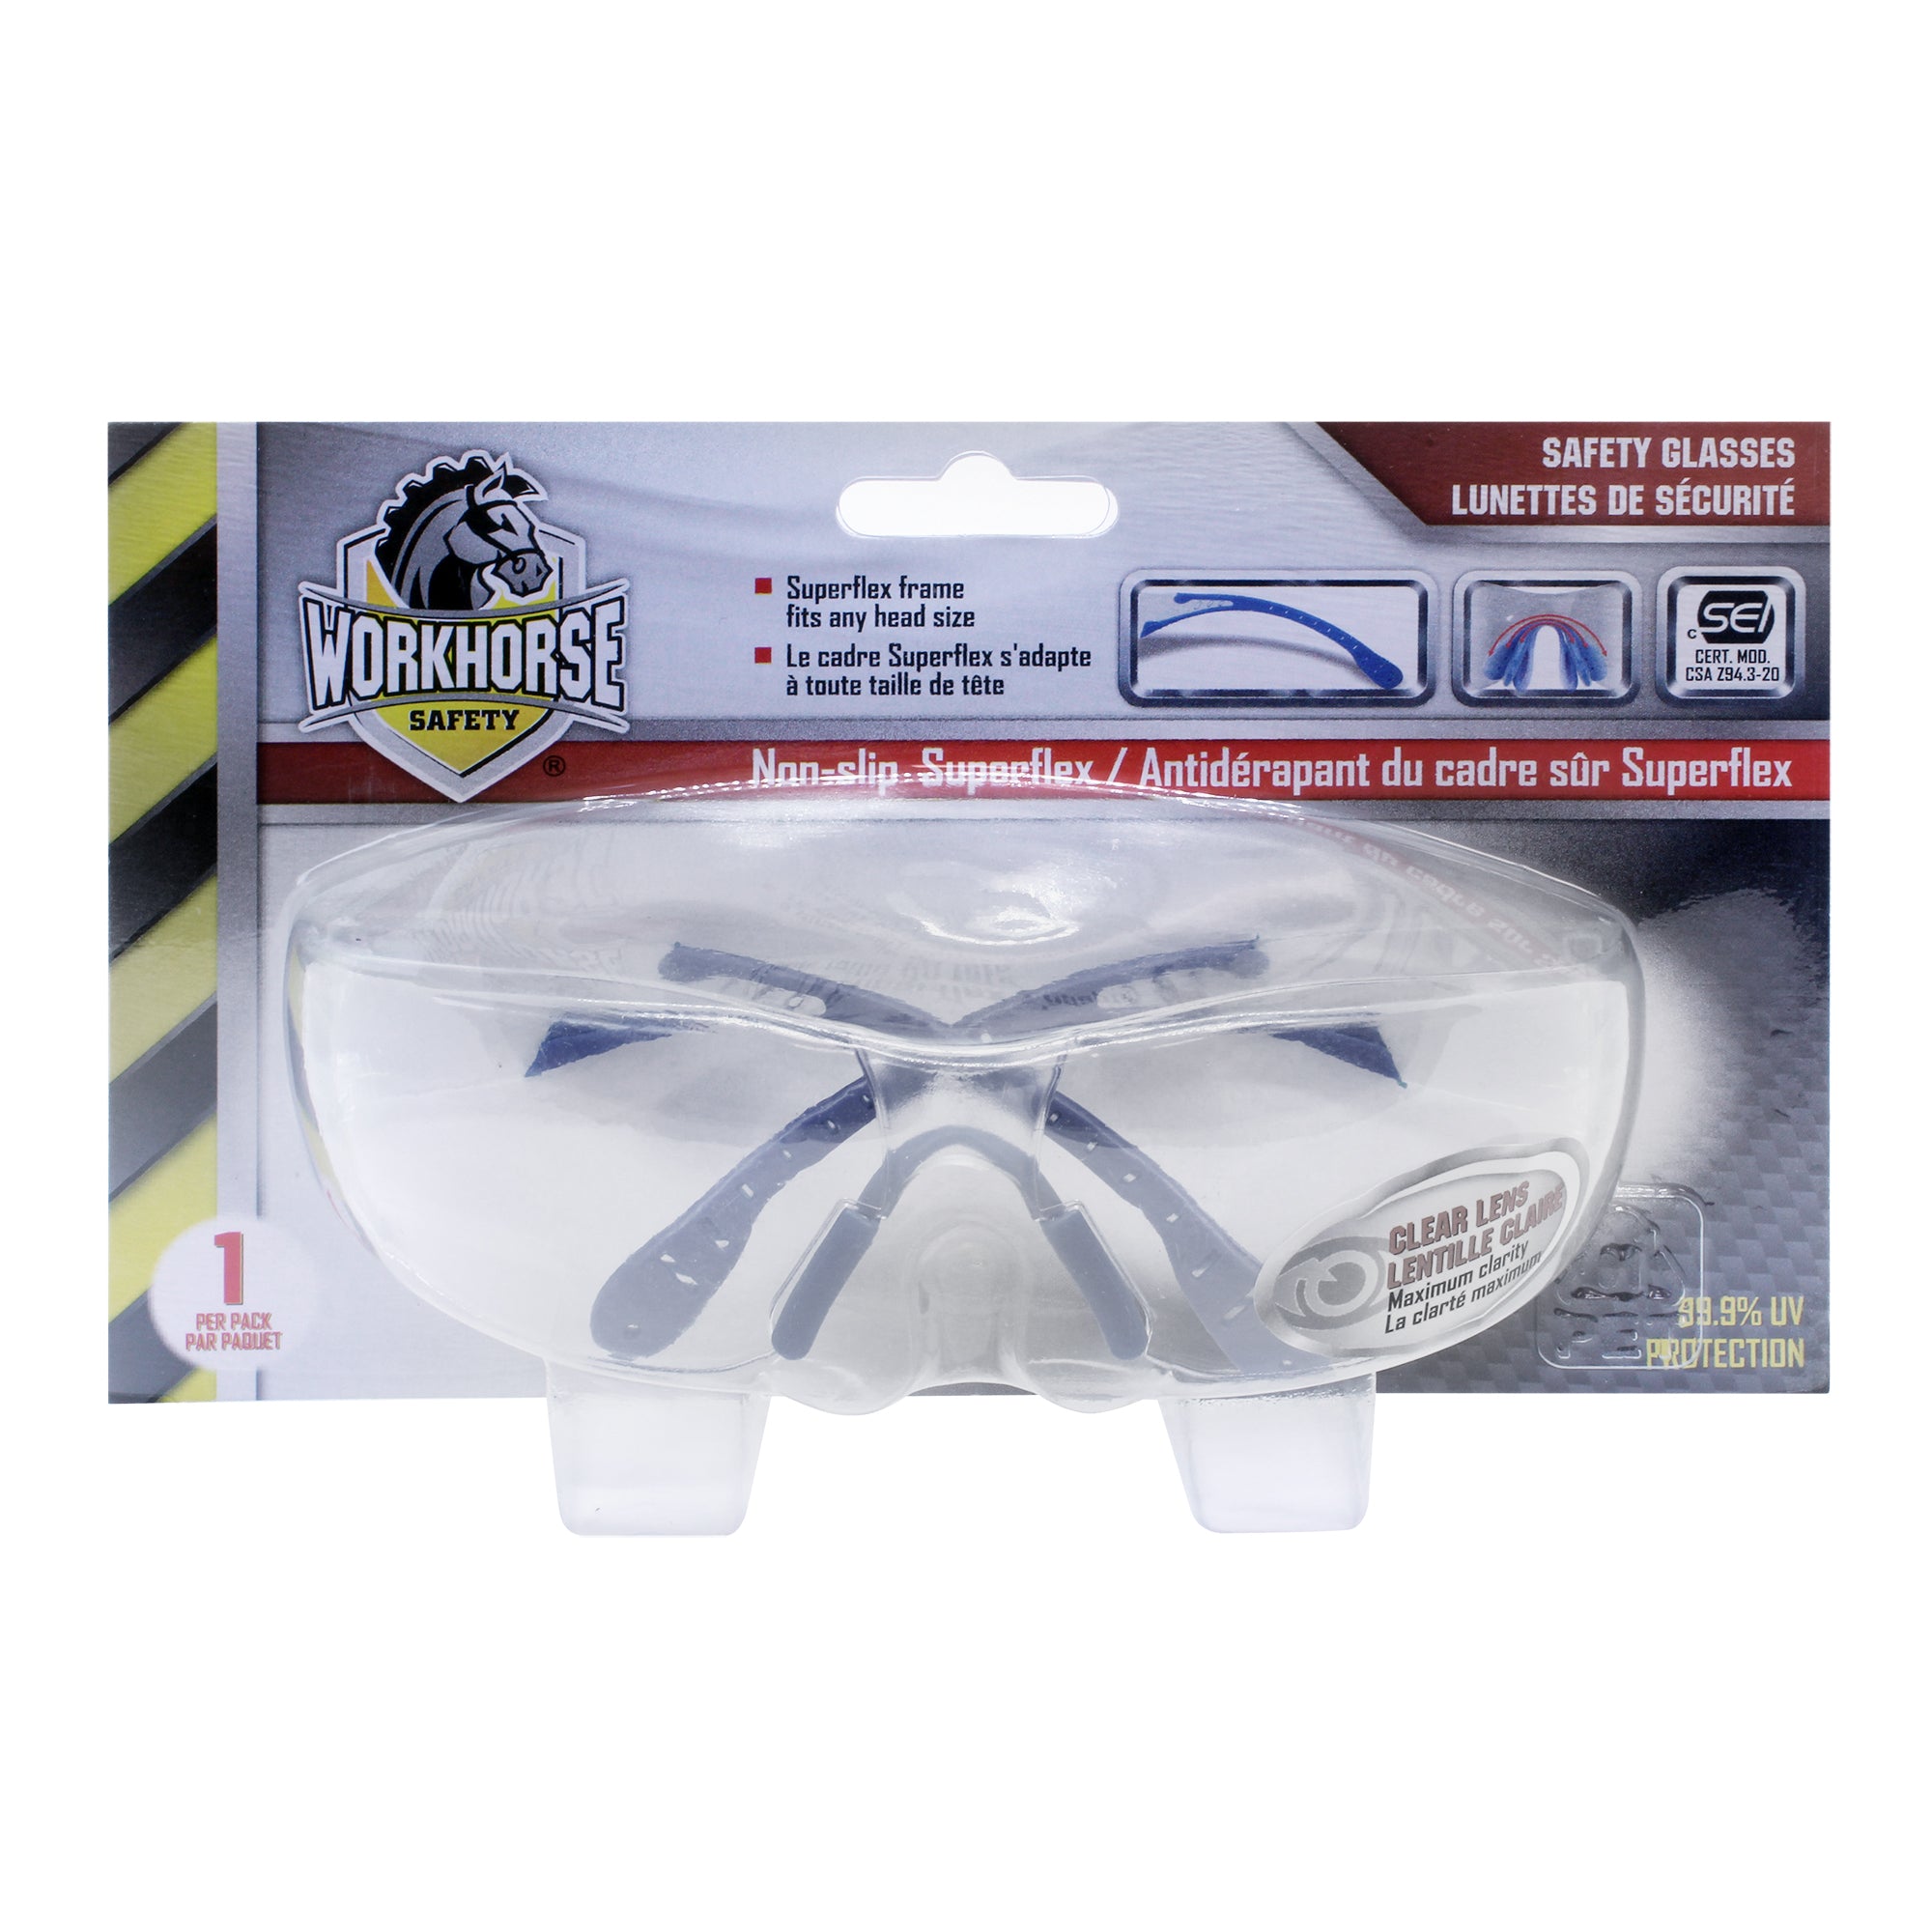 WORKHORSE® Superflex Safety Glasses with non-slip grip nose piece and arms, Clear